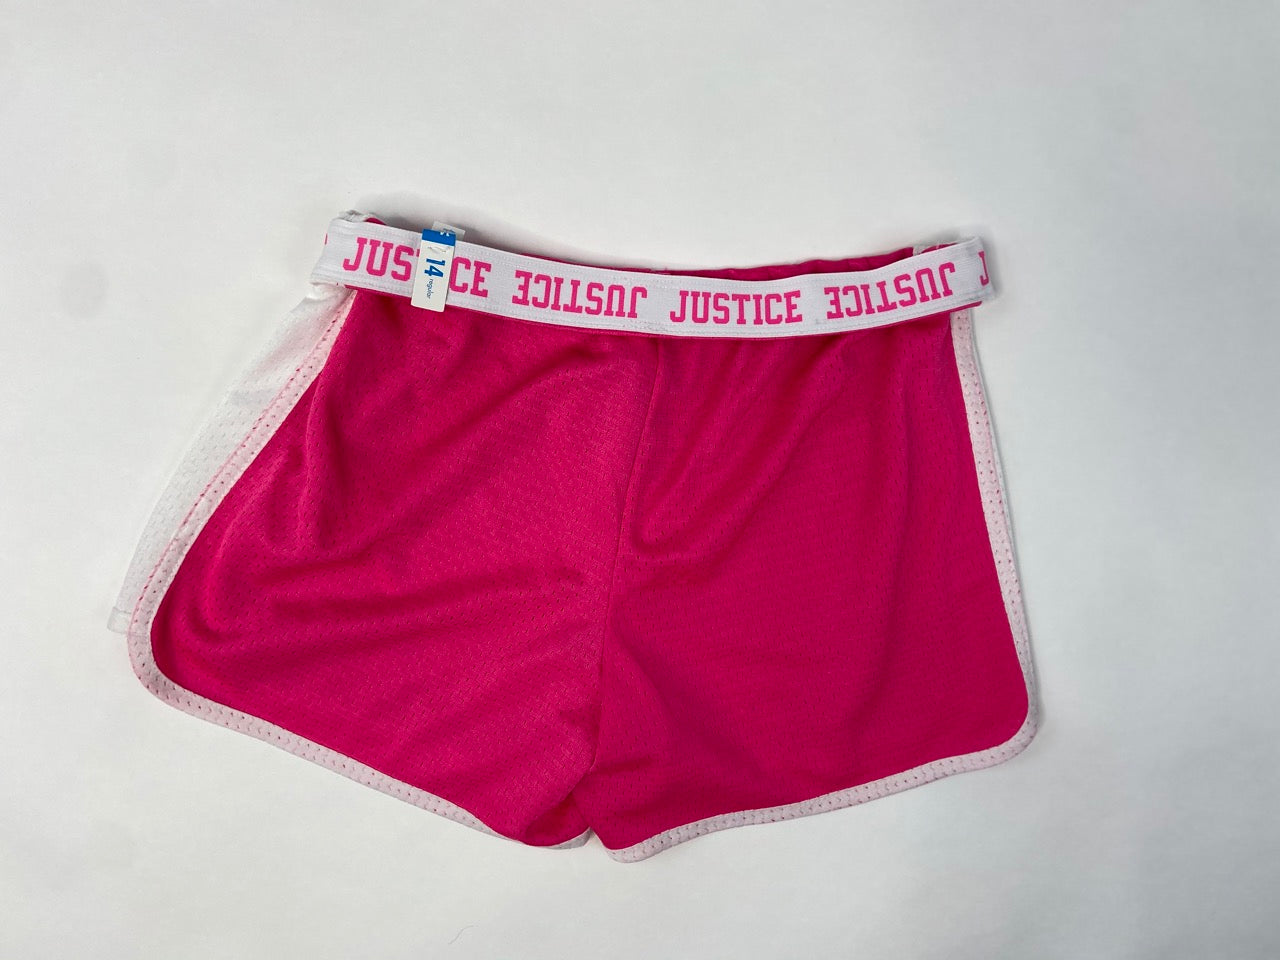 Pink Athletic Shorts - Youth L (14)